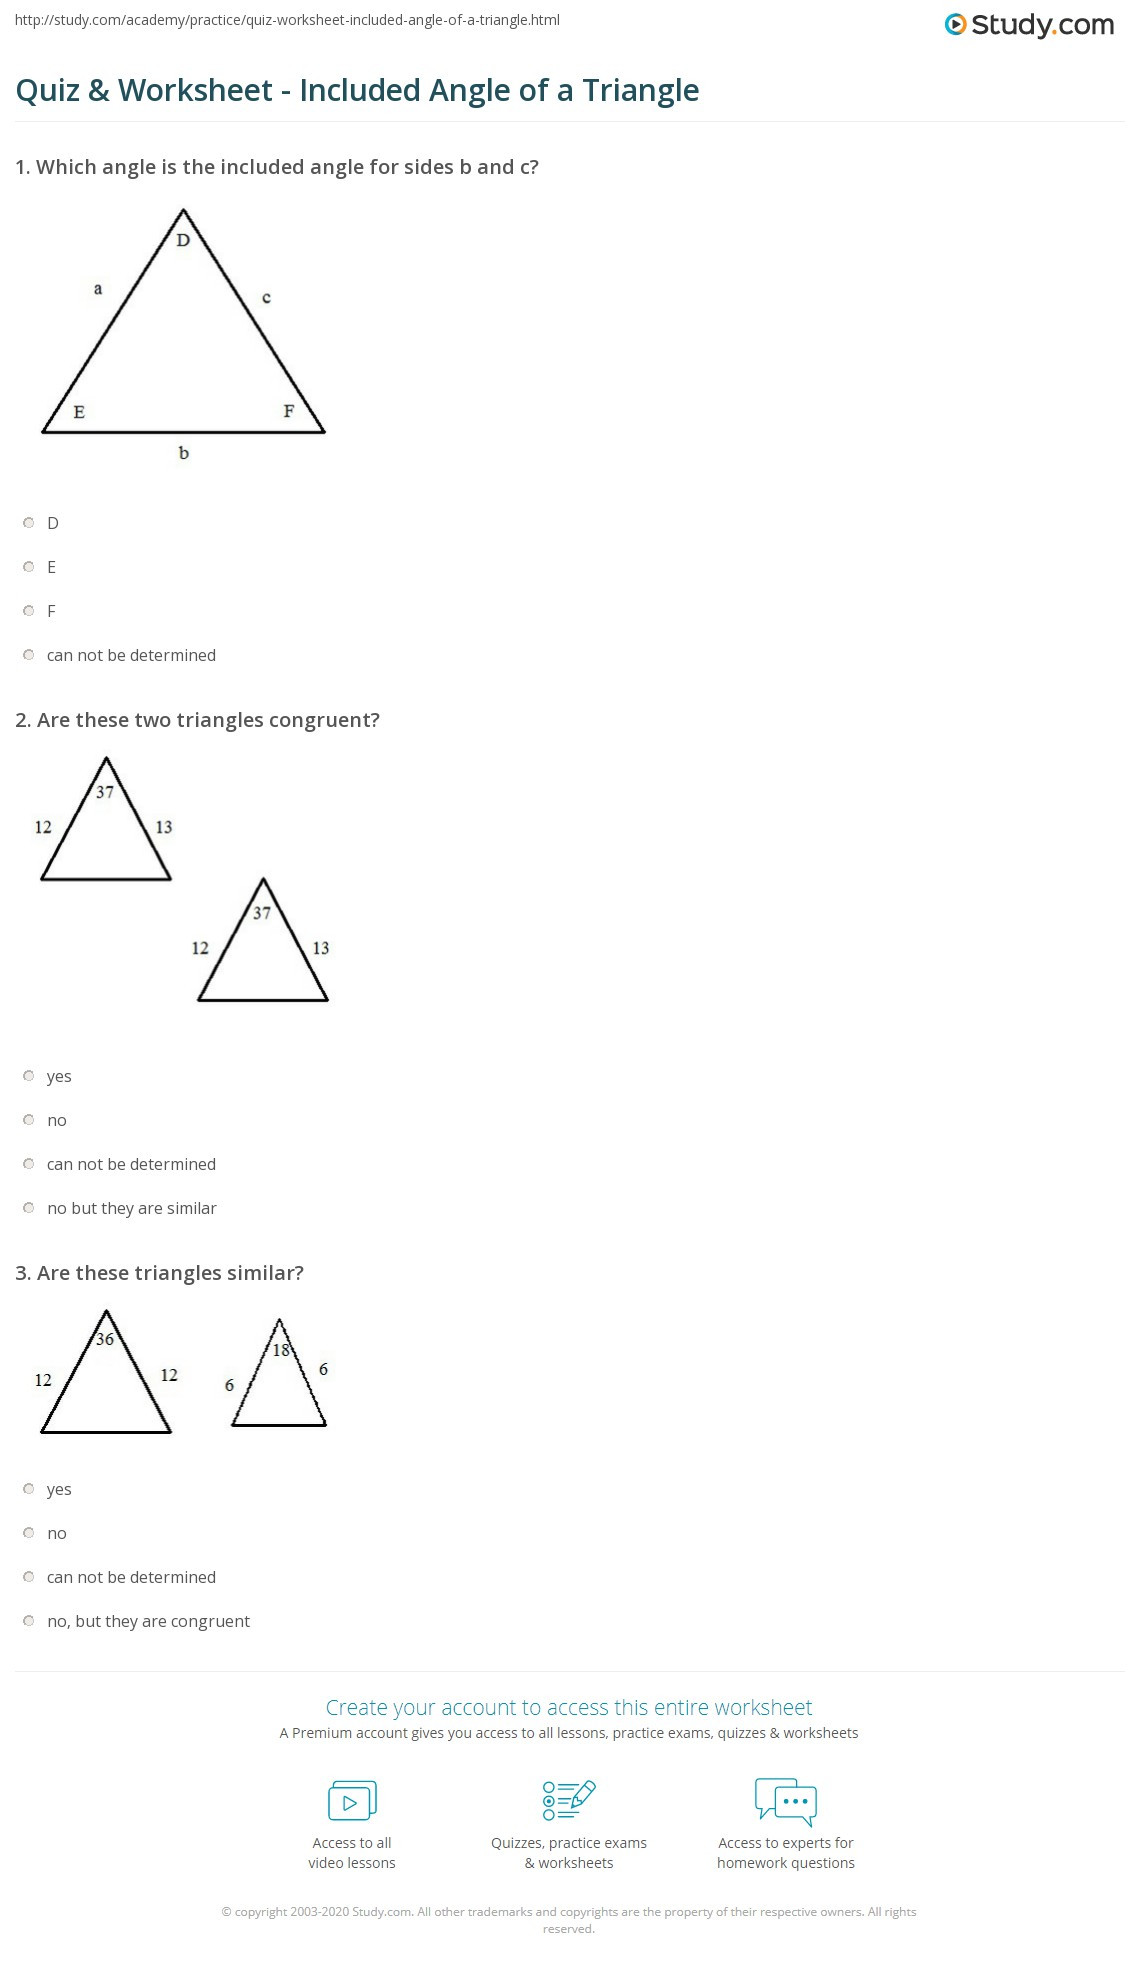 Triangle Congruence Practice Worksheet Quiz &amp; Worksheet Included Angle Of A Triangle